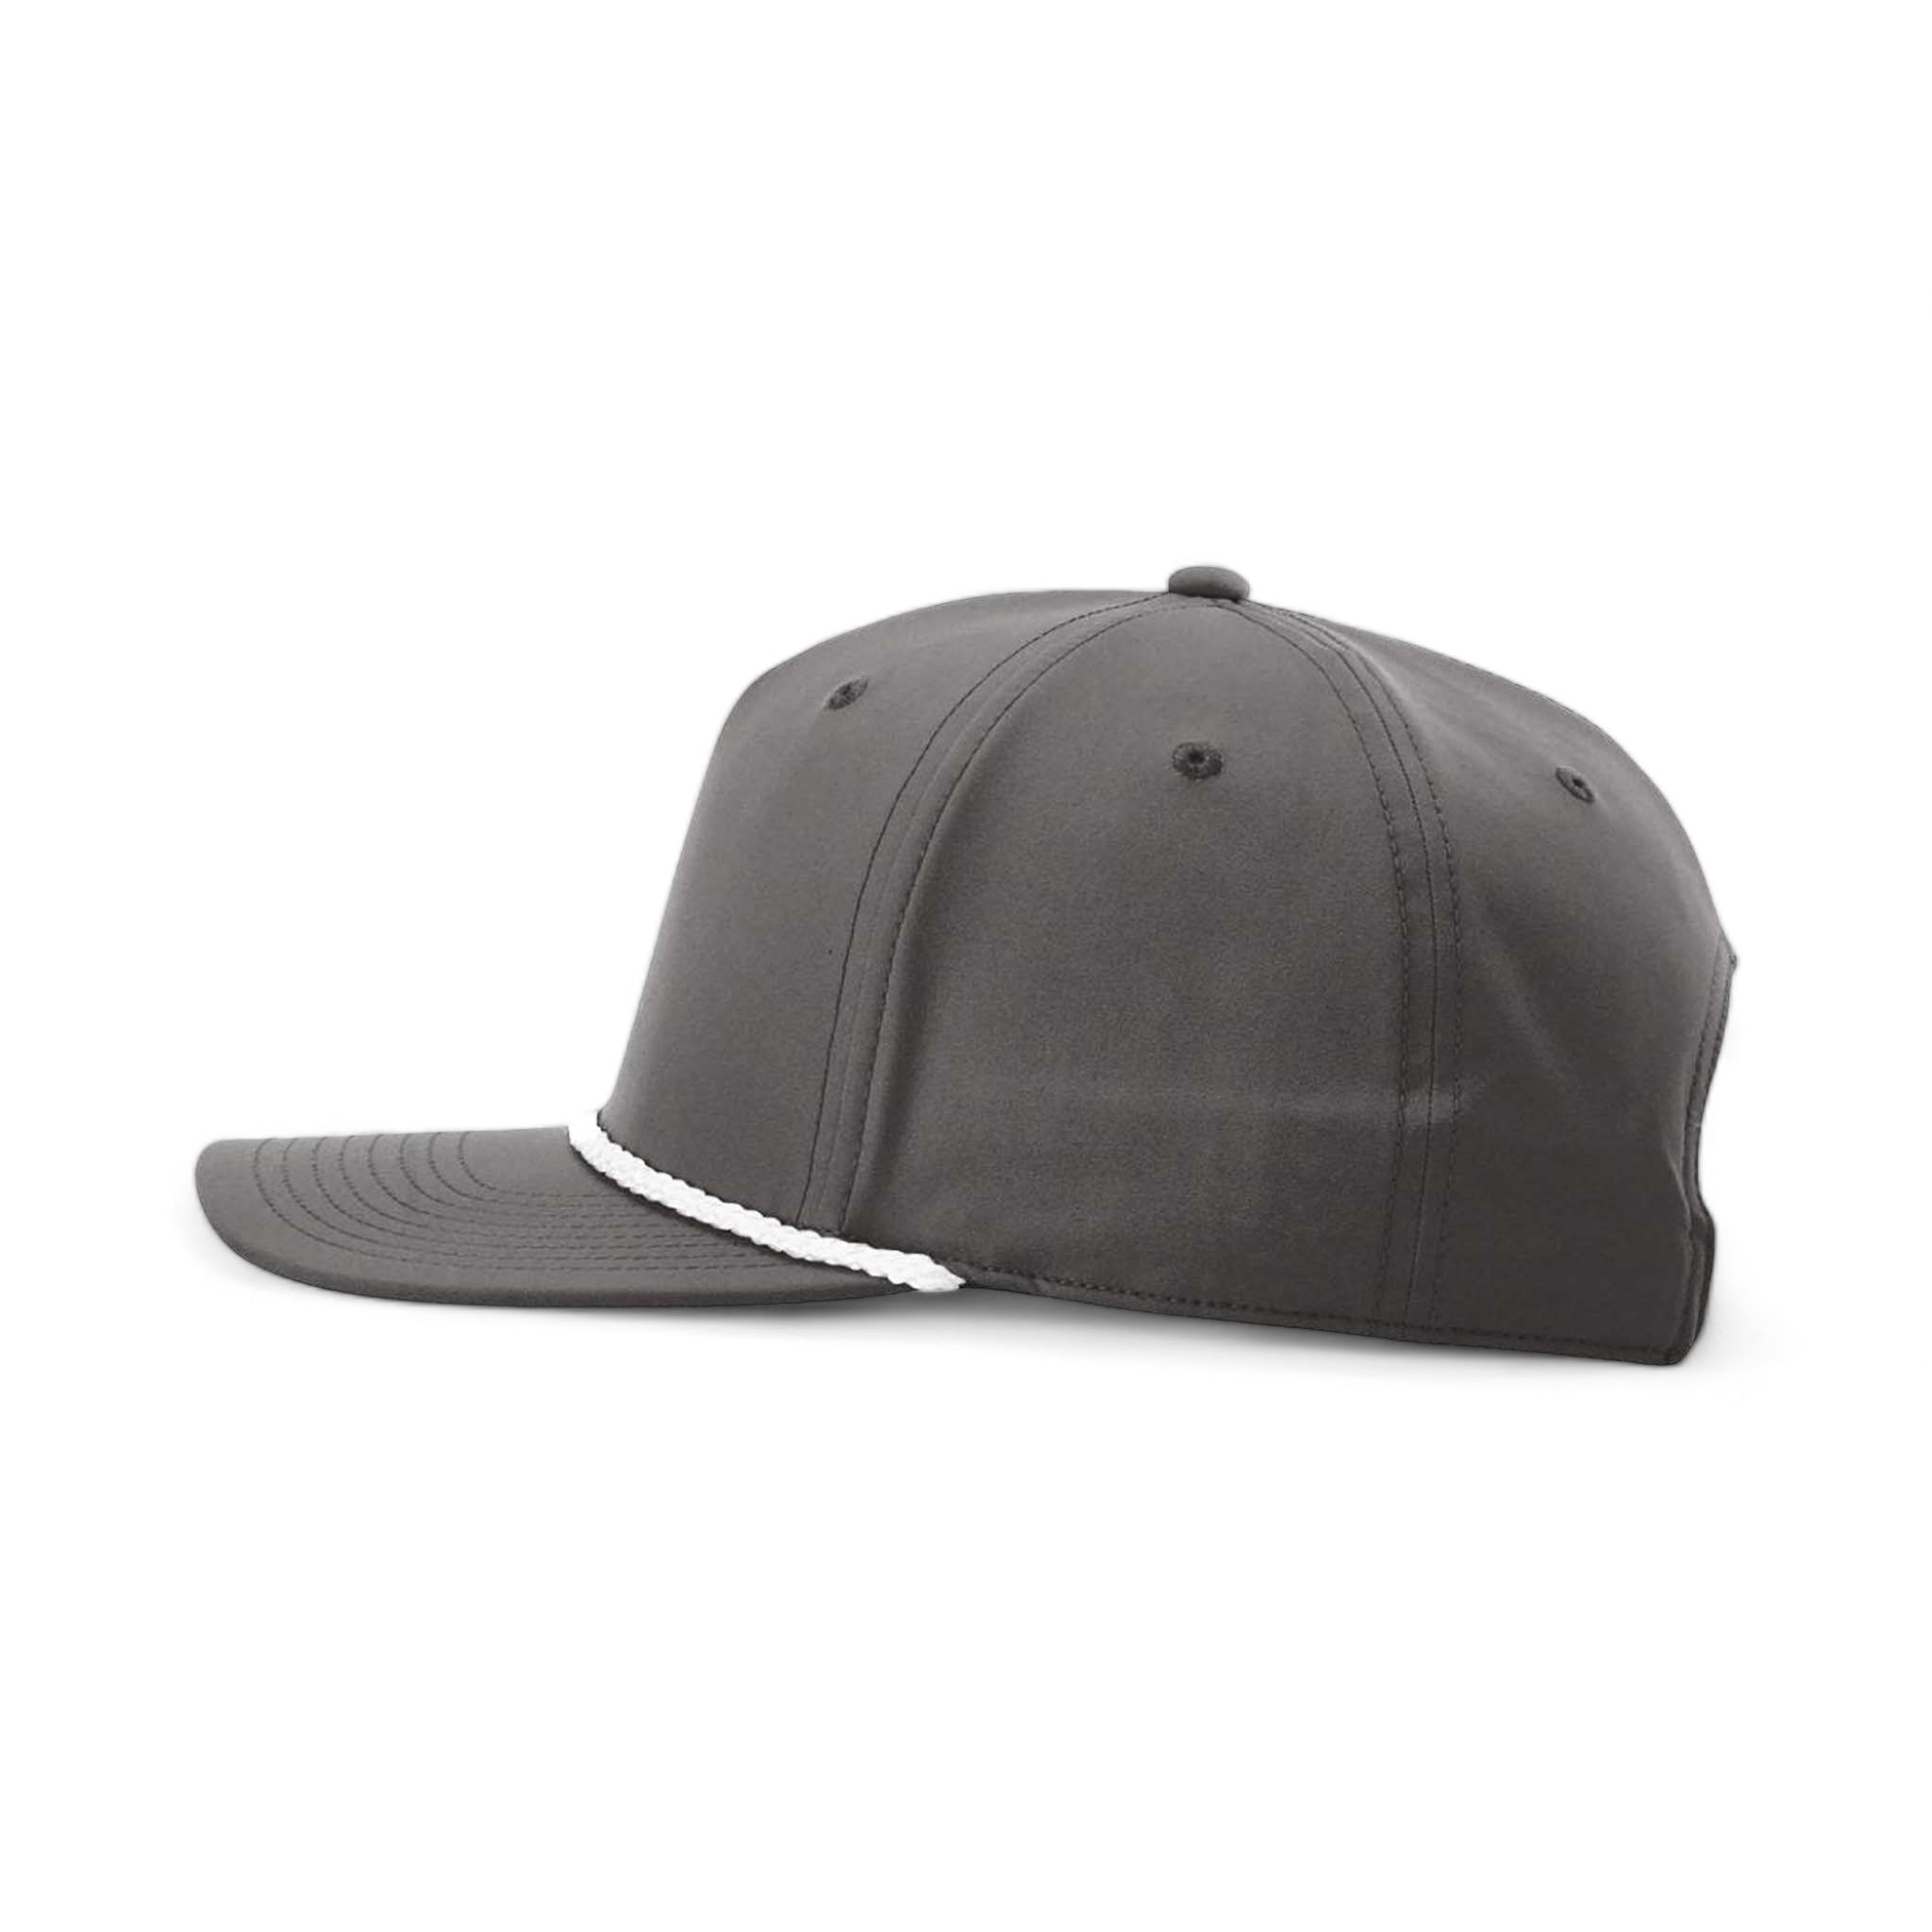 Side view of Richardson 258 custom hat in dark grey and white